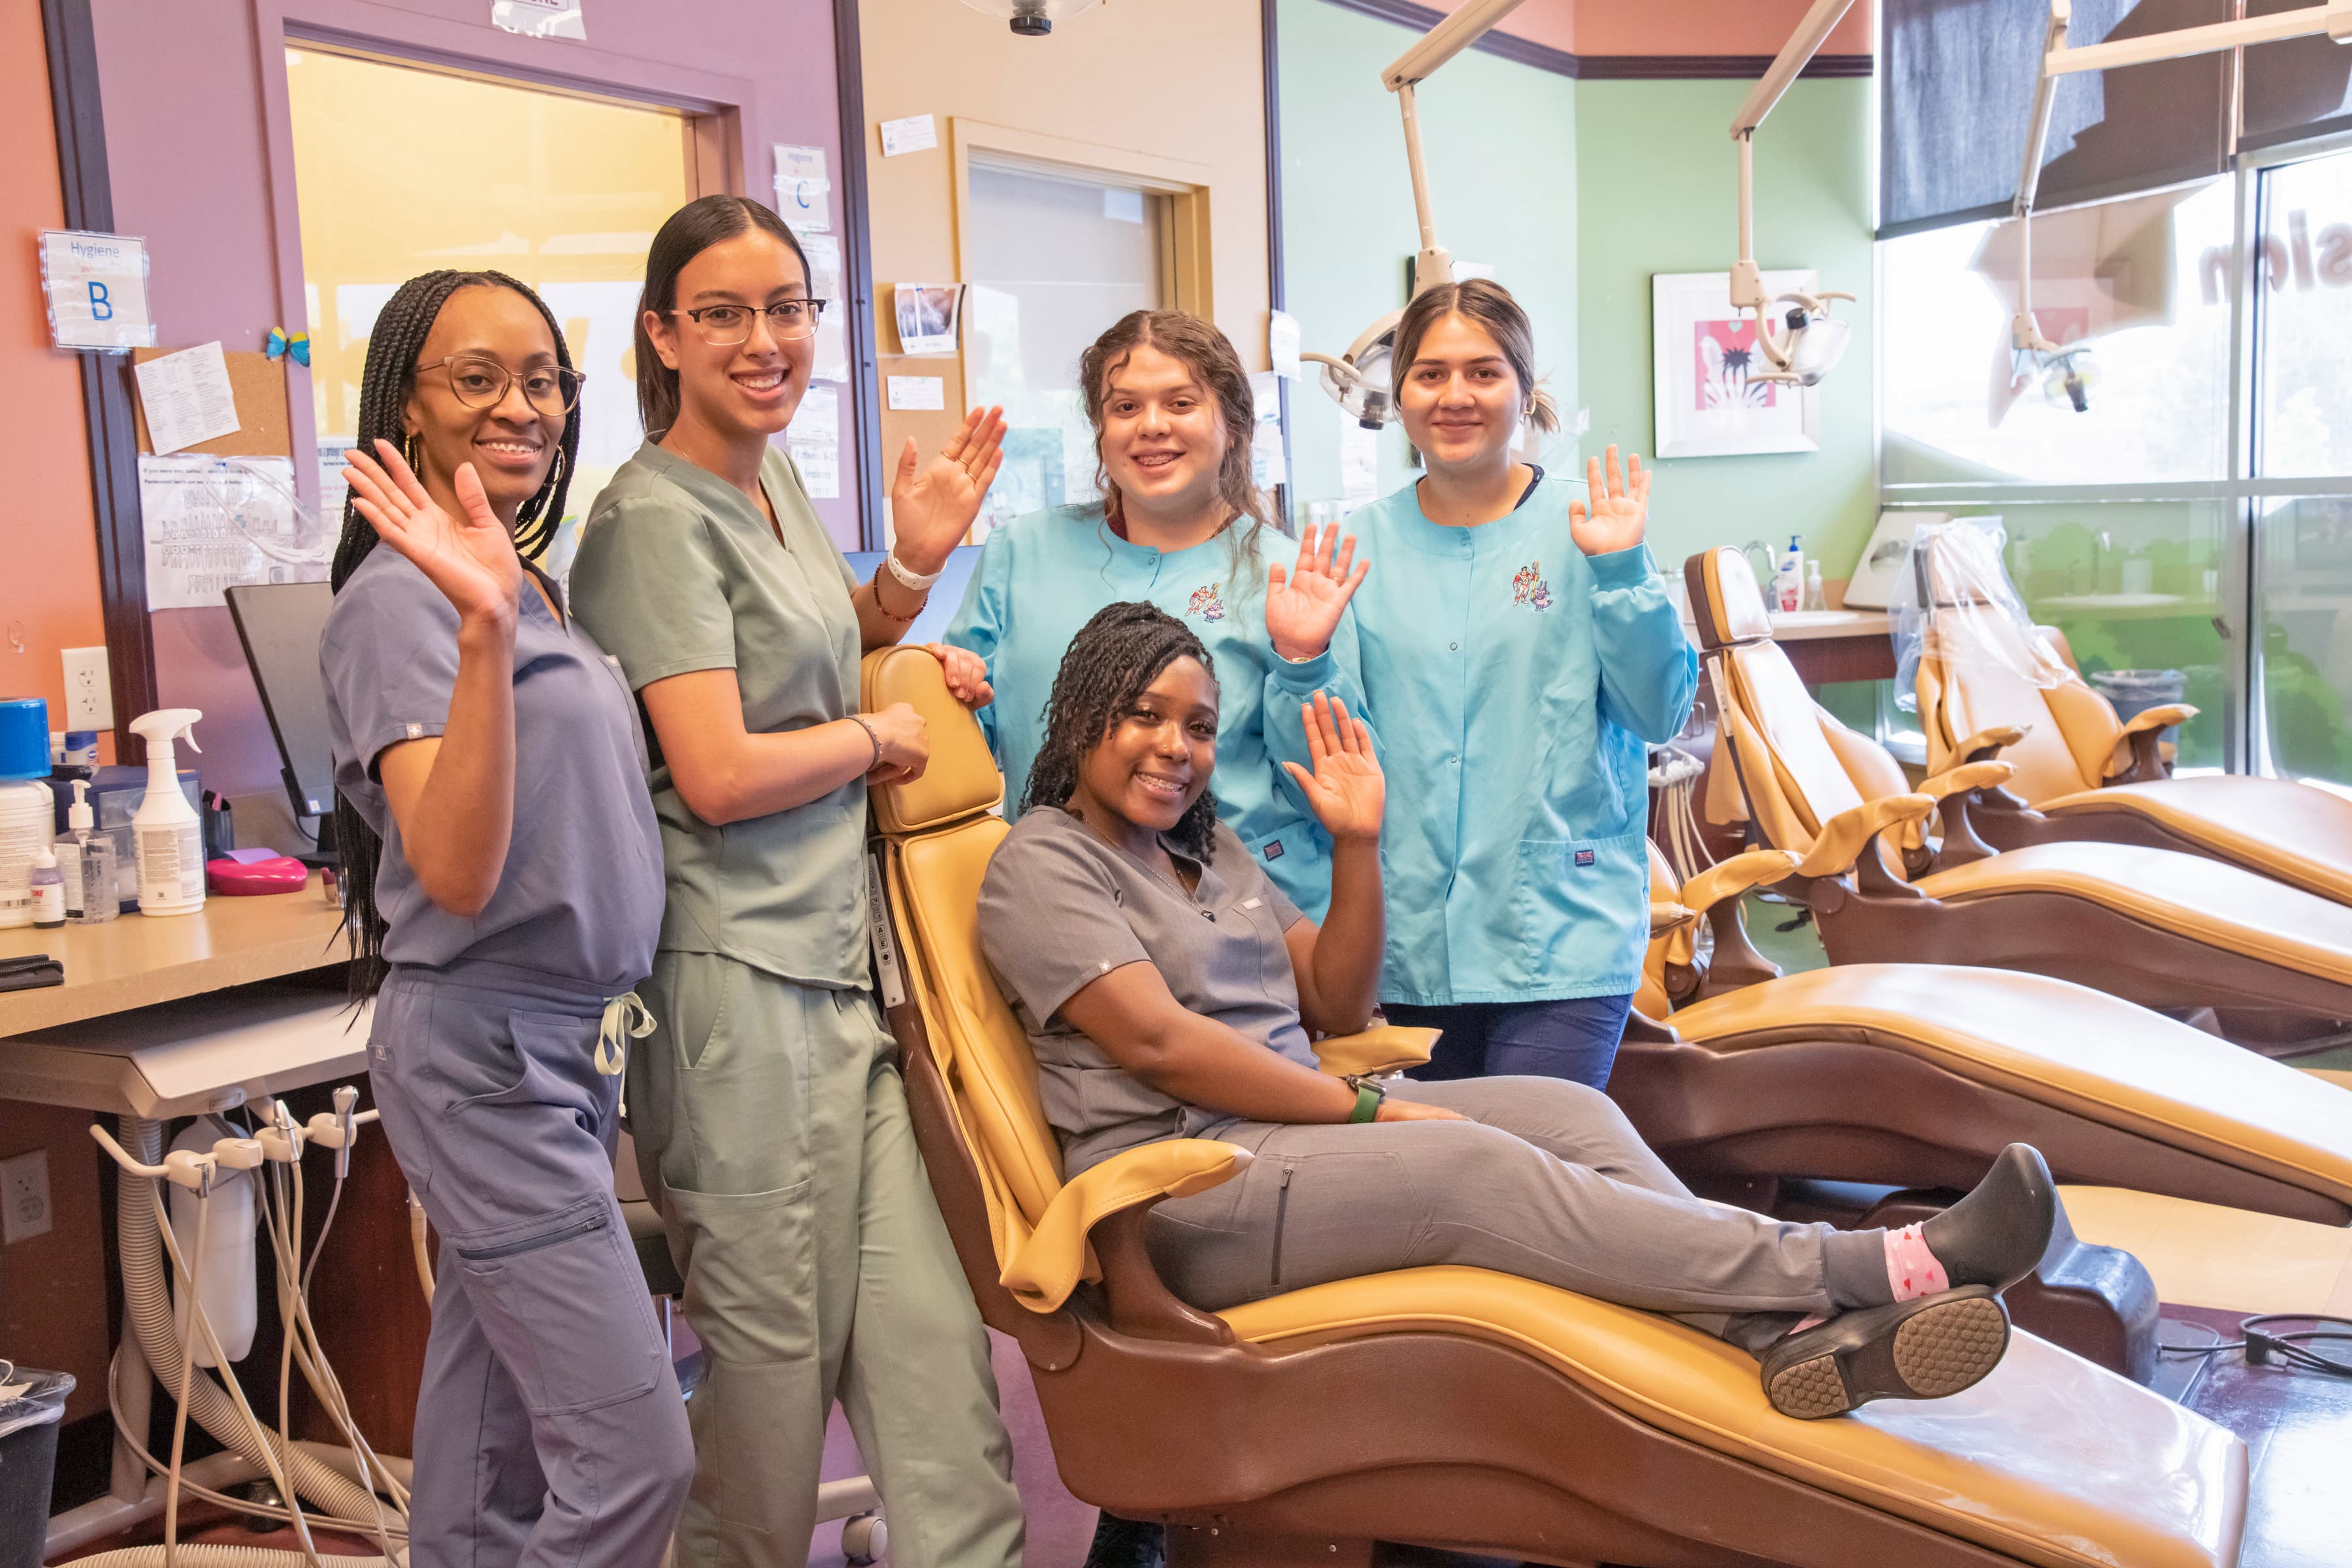 Pediatric dental care staff at Colorado Springs location on north academy. Staff is wearingcolorful scrubs and one person is sitting in a dental chair.